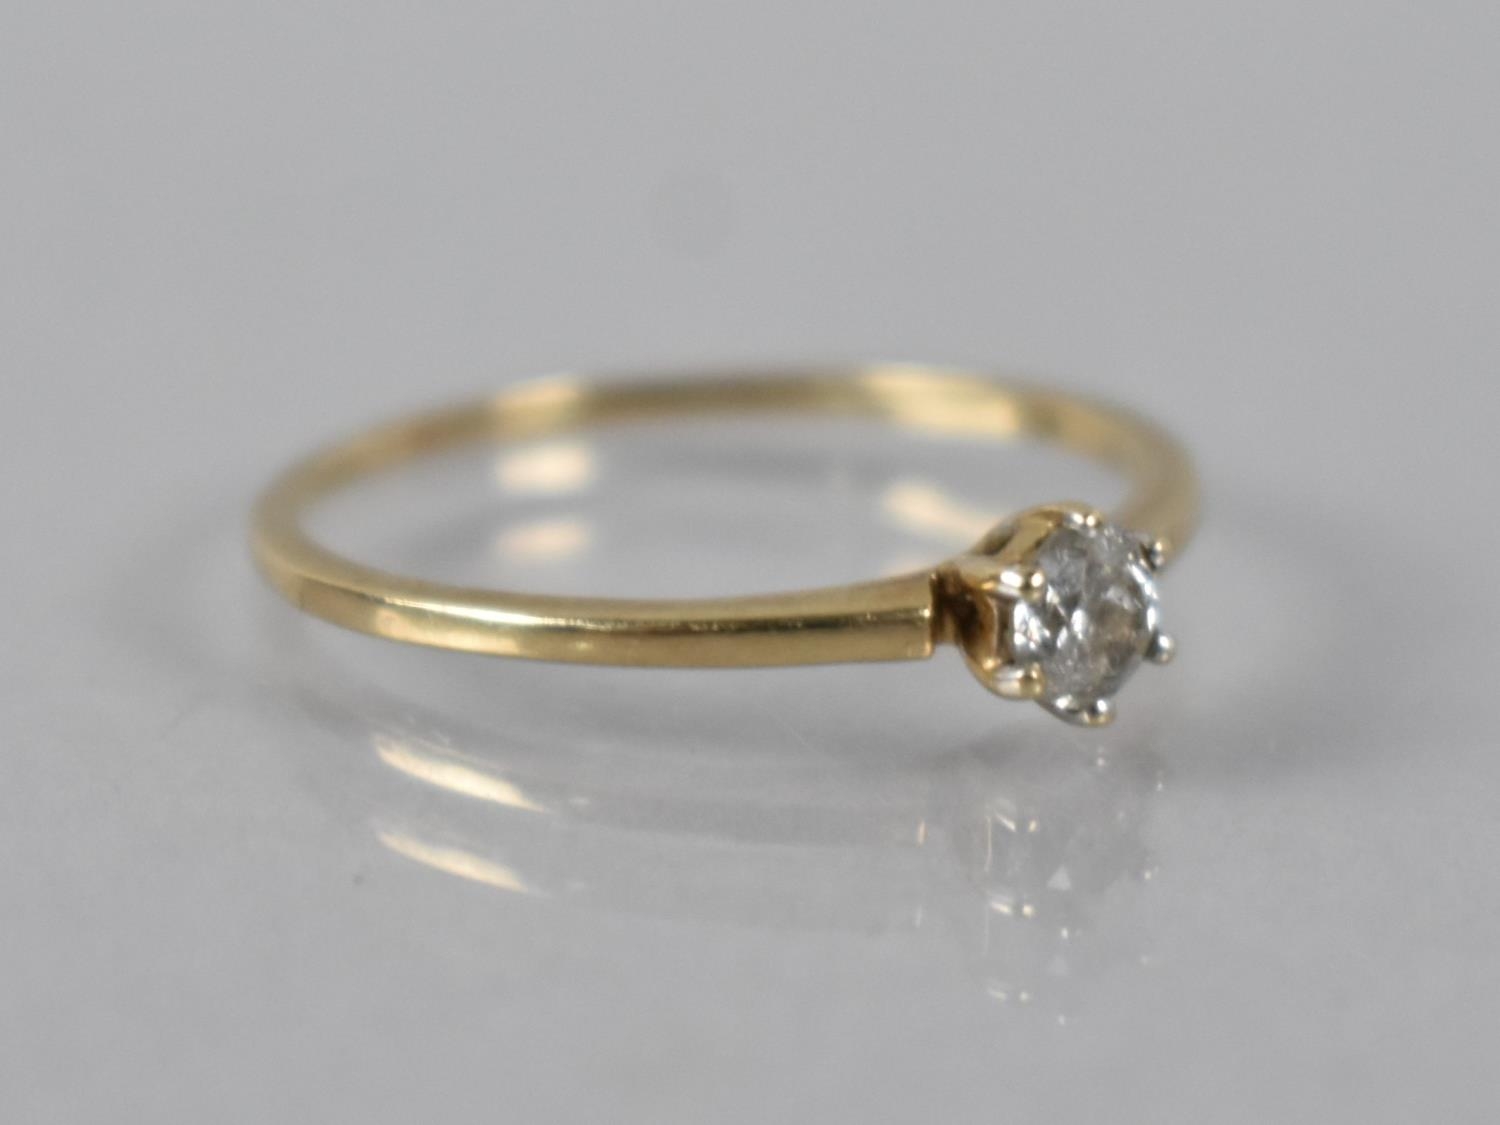 A 9ct Gold Mounted Diamond Ring, Round Cut Stone Measuring 3.7mm in Six Claws to a Delicate 9ct Gold